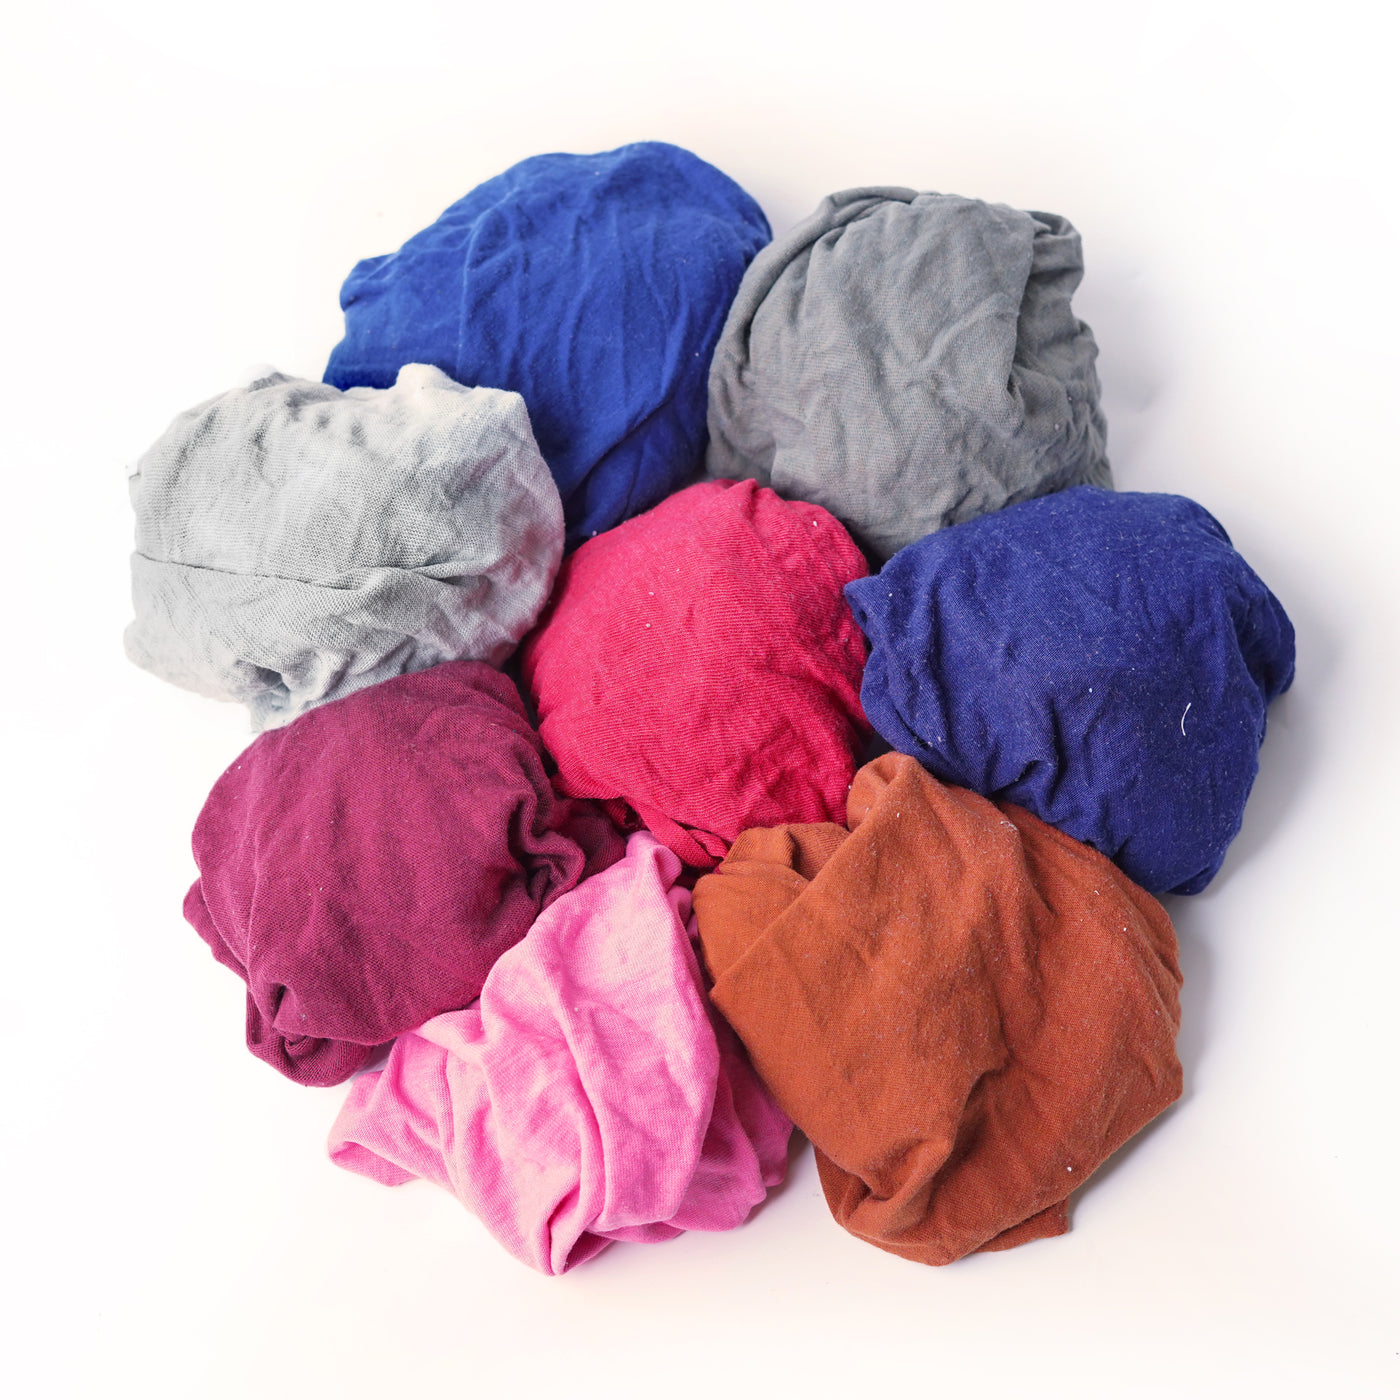 T-shirt Rags Bulk Recycled Mixed Colors 25 Pound Box